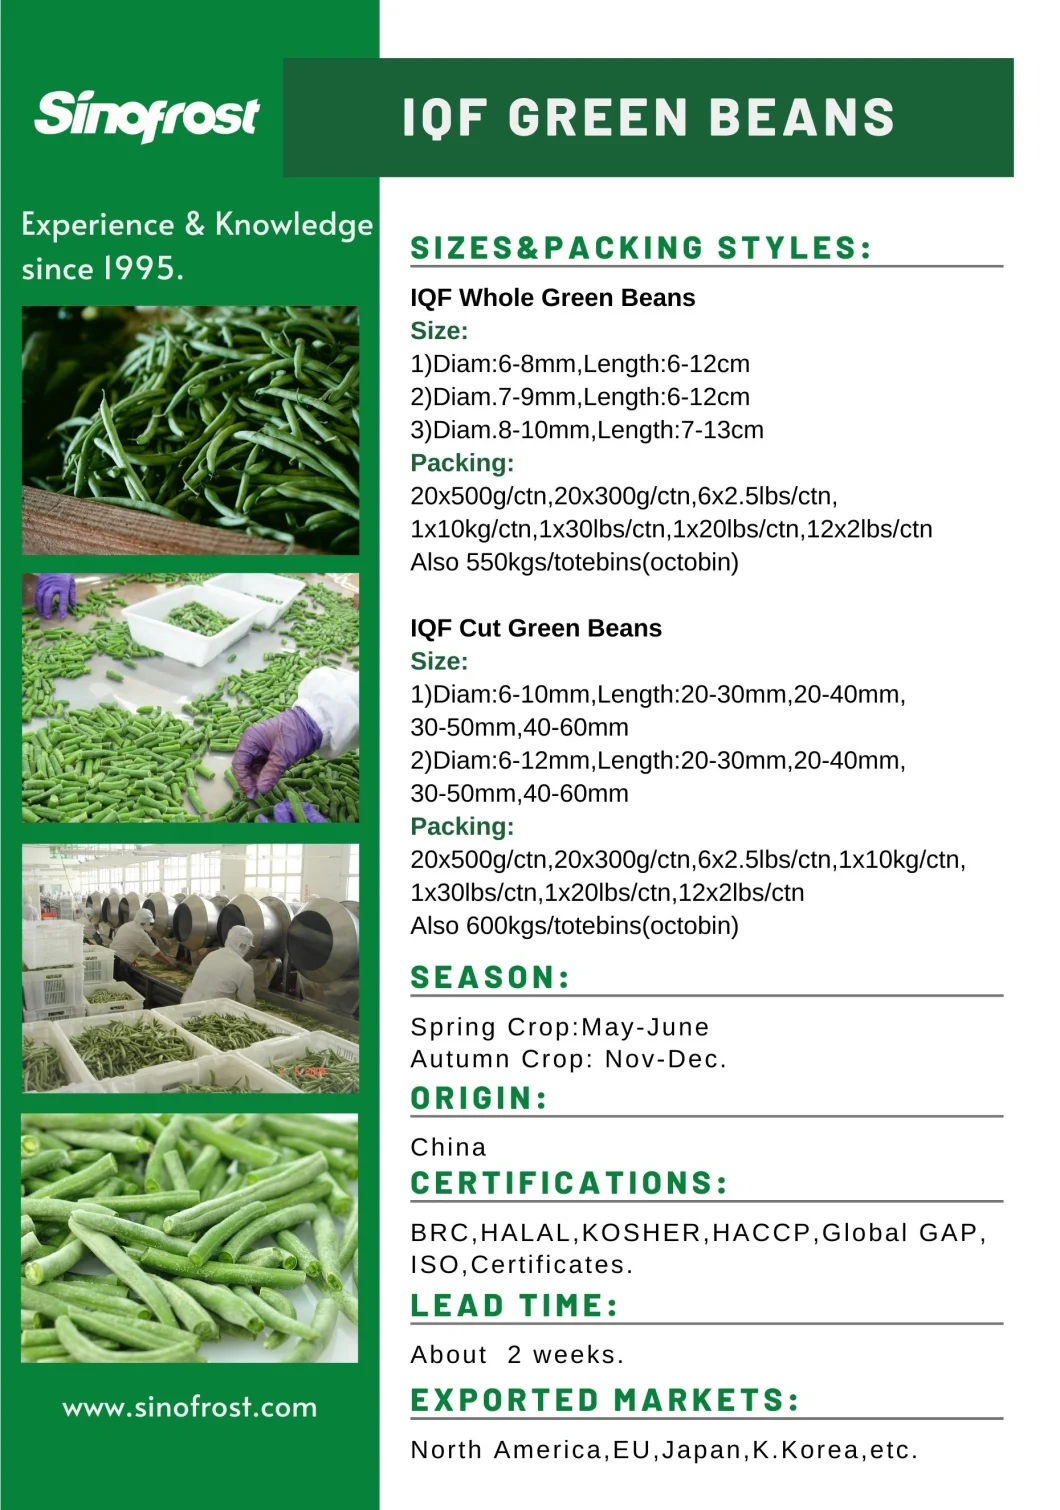 Best Prices, IQF Frozen Green Bean Wholes, IQF Frozen Green Bean Cuts, Frozen Green Bean Cuts, Frozen Green Bean Whole, IQF Cut Green Bean, IQF Whole Green Bean